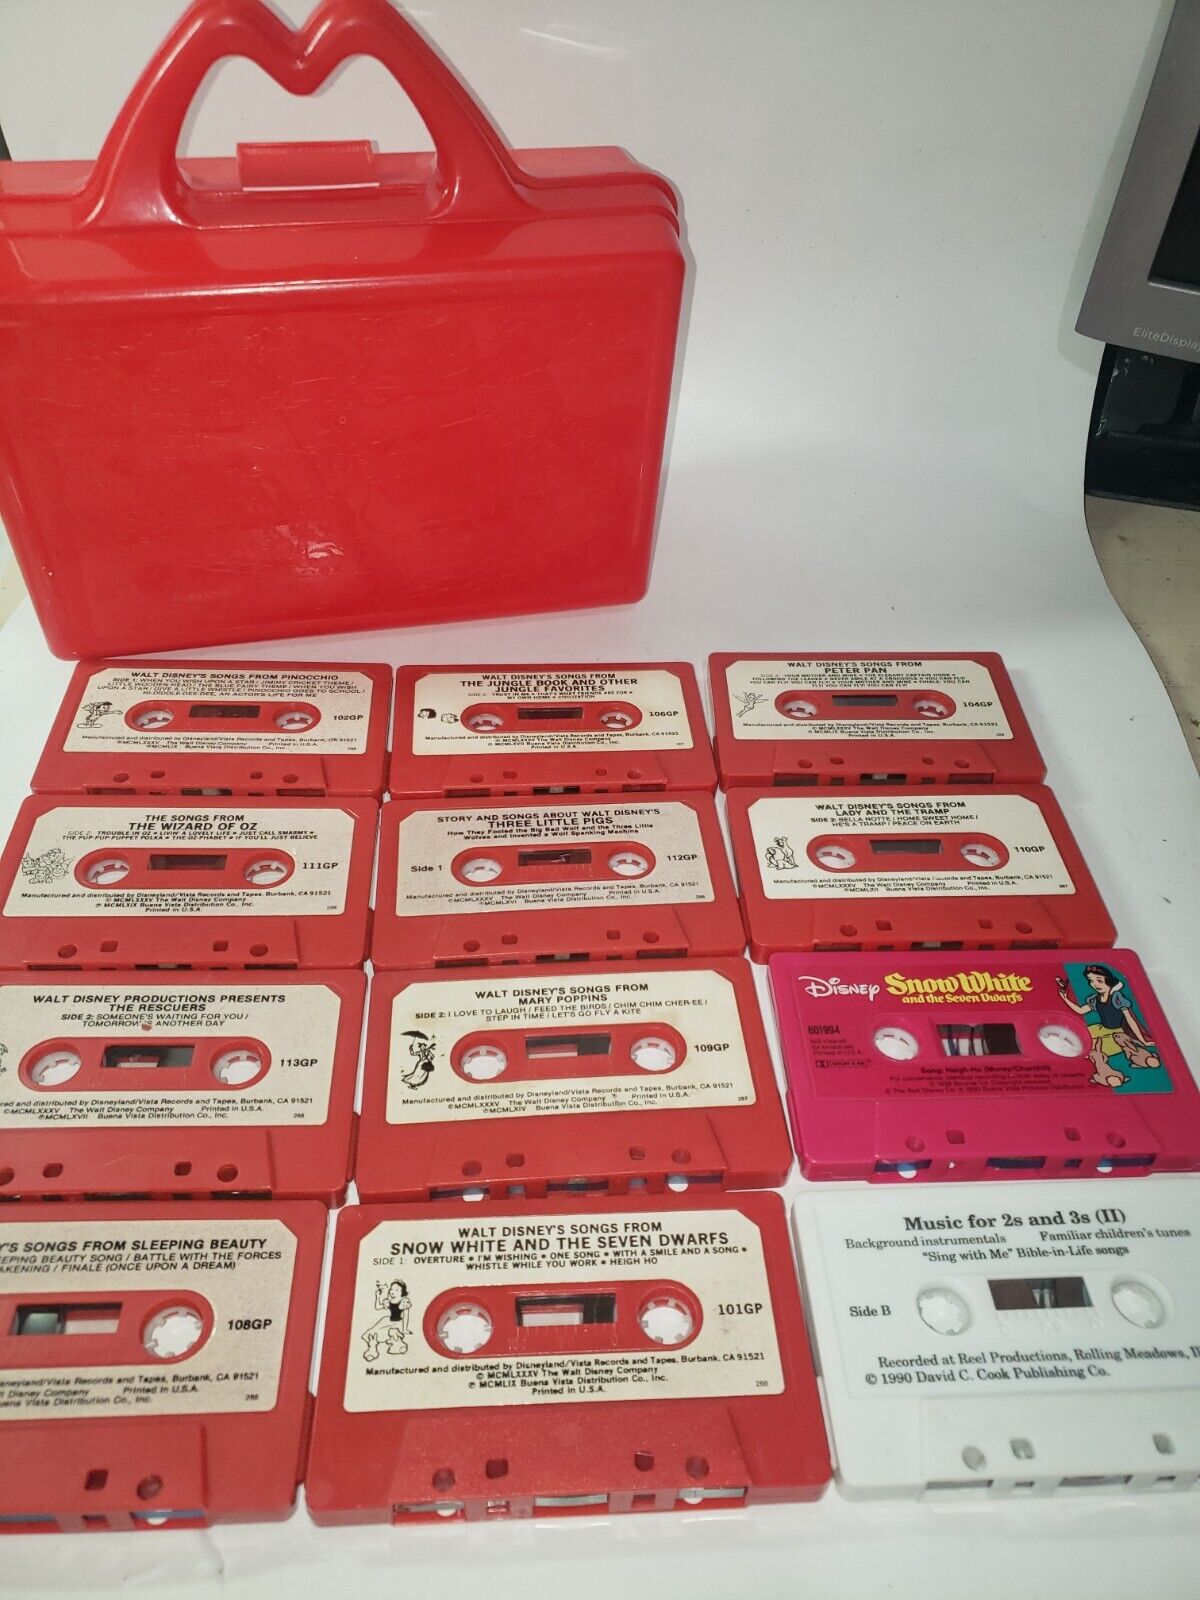 Vintage 1985 Walt Disney's Songs from Movies Cassettes with McDonald's Lunchbox 